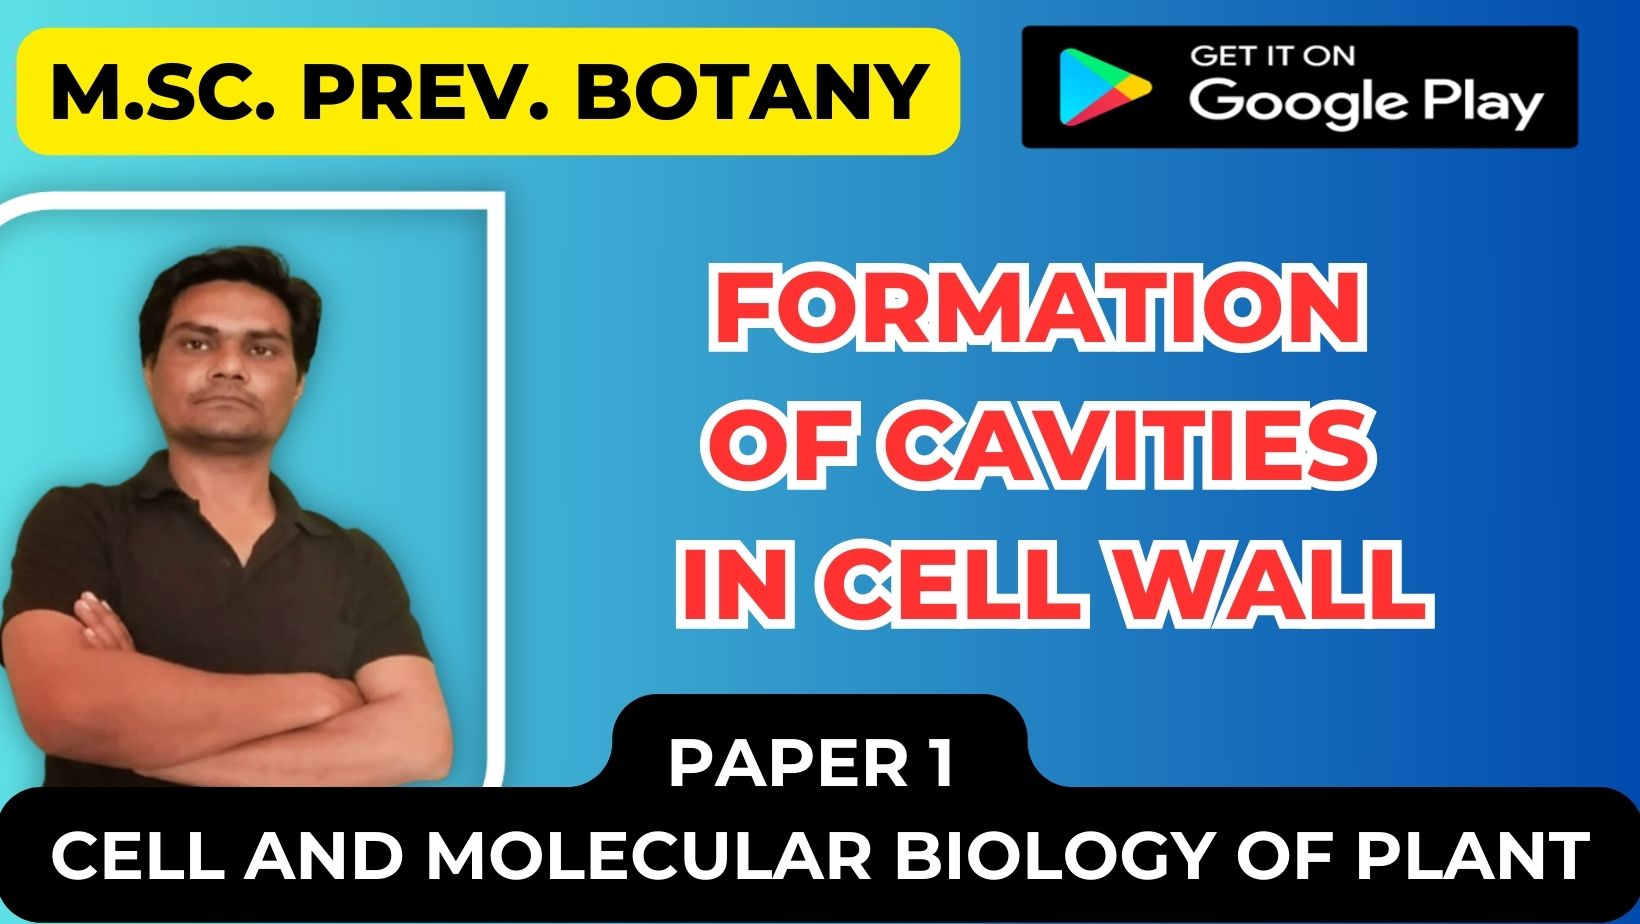 You are currently viewing Formation of Cavities in cell wall